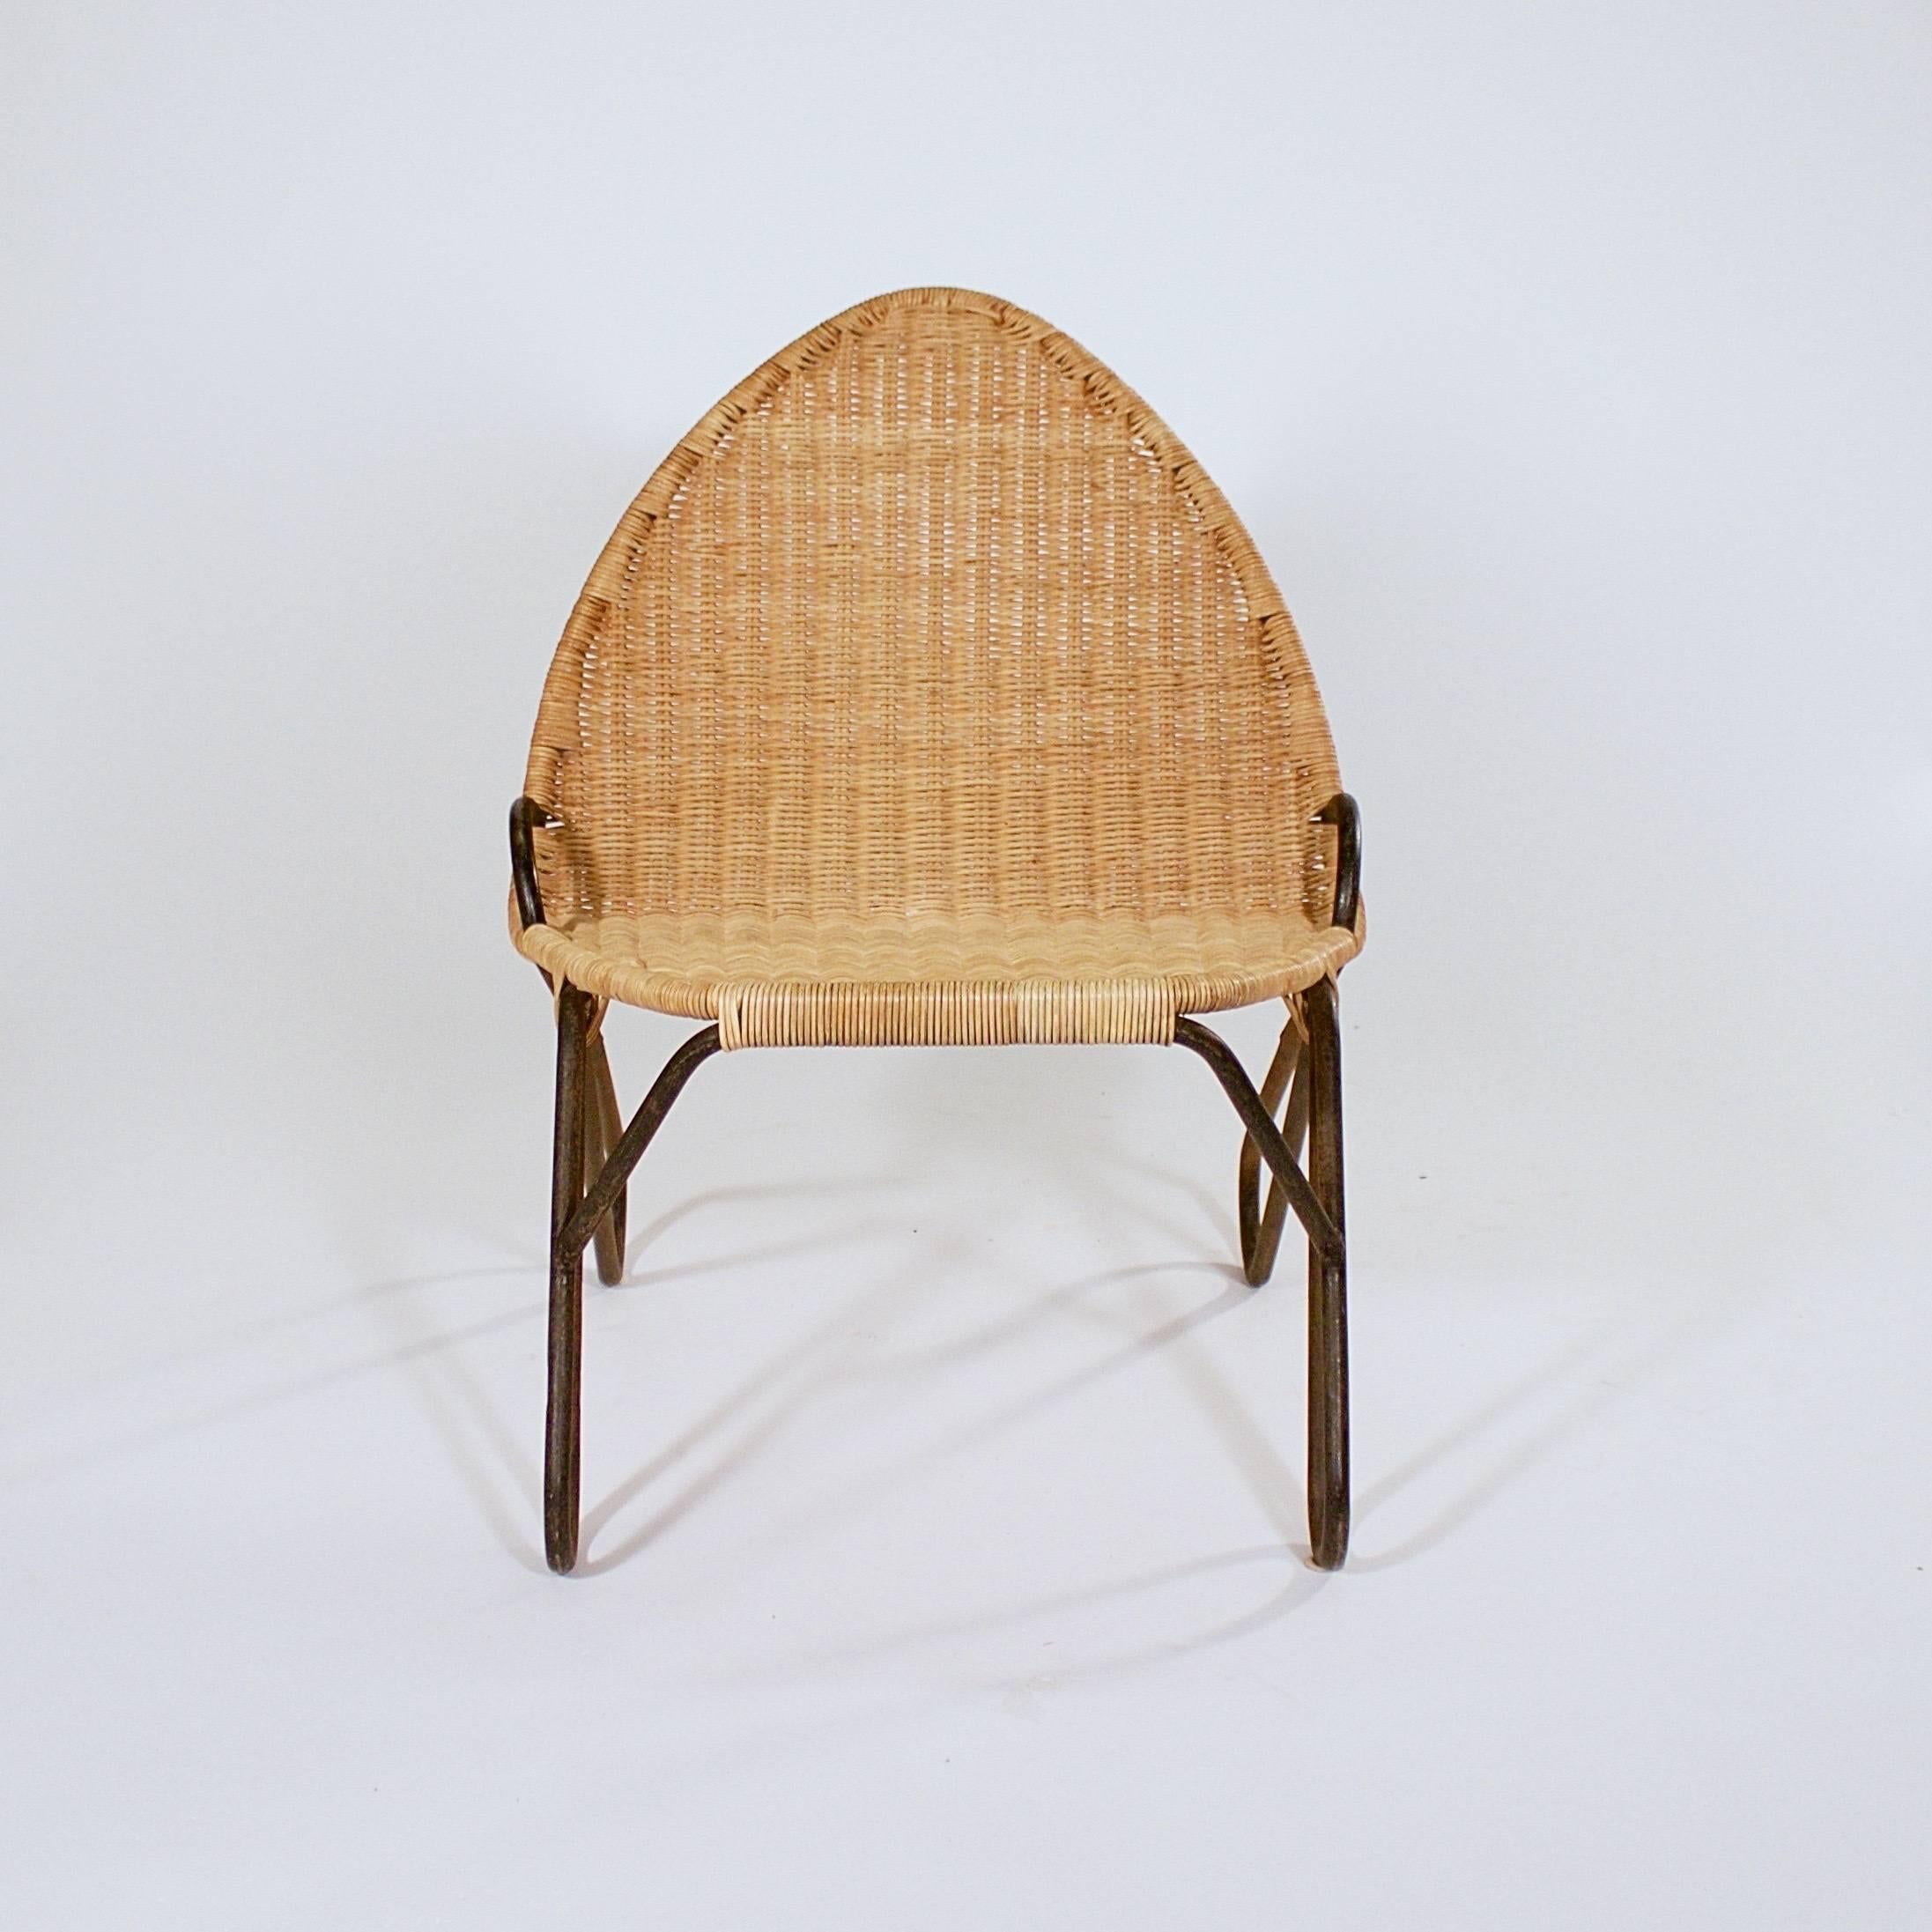 The caned seat and arched back supported by a continuous bent iron frame.

Sweden, circa 1950s.